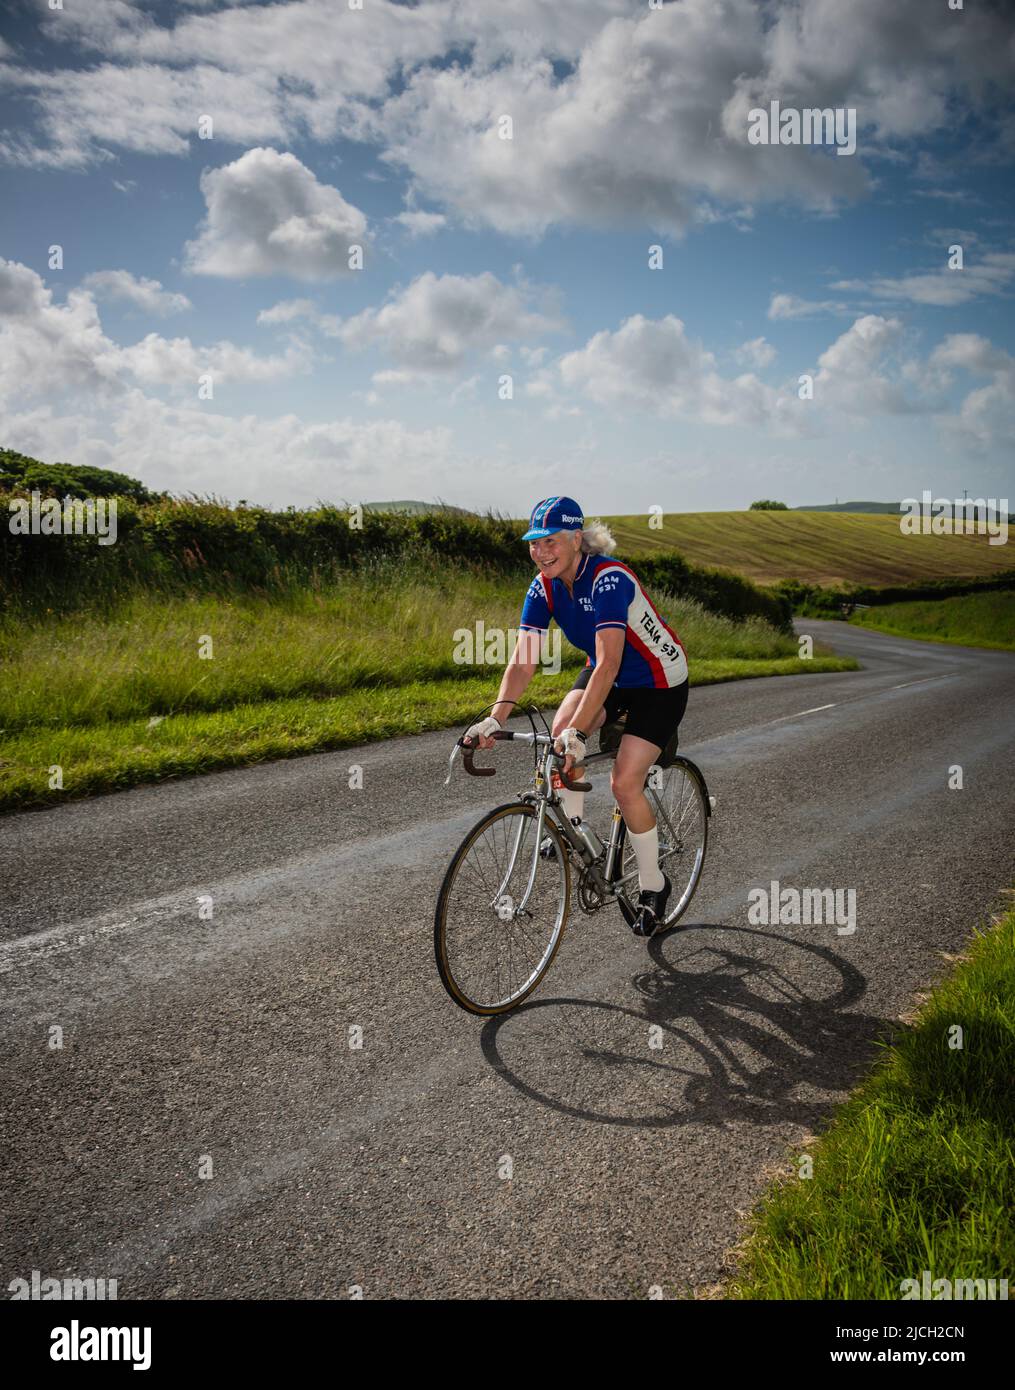 Mature female road cyclist in the Veloretro vintage cycling event, Ulverston, Cumbria, UK. Stock Photo